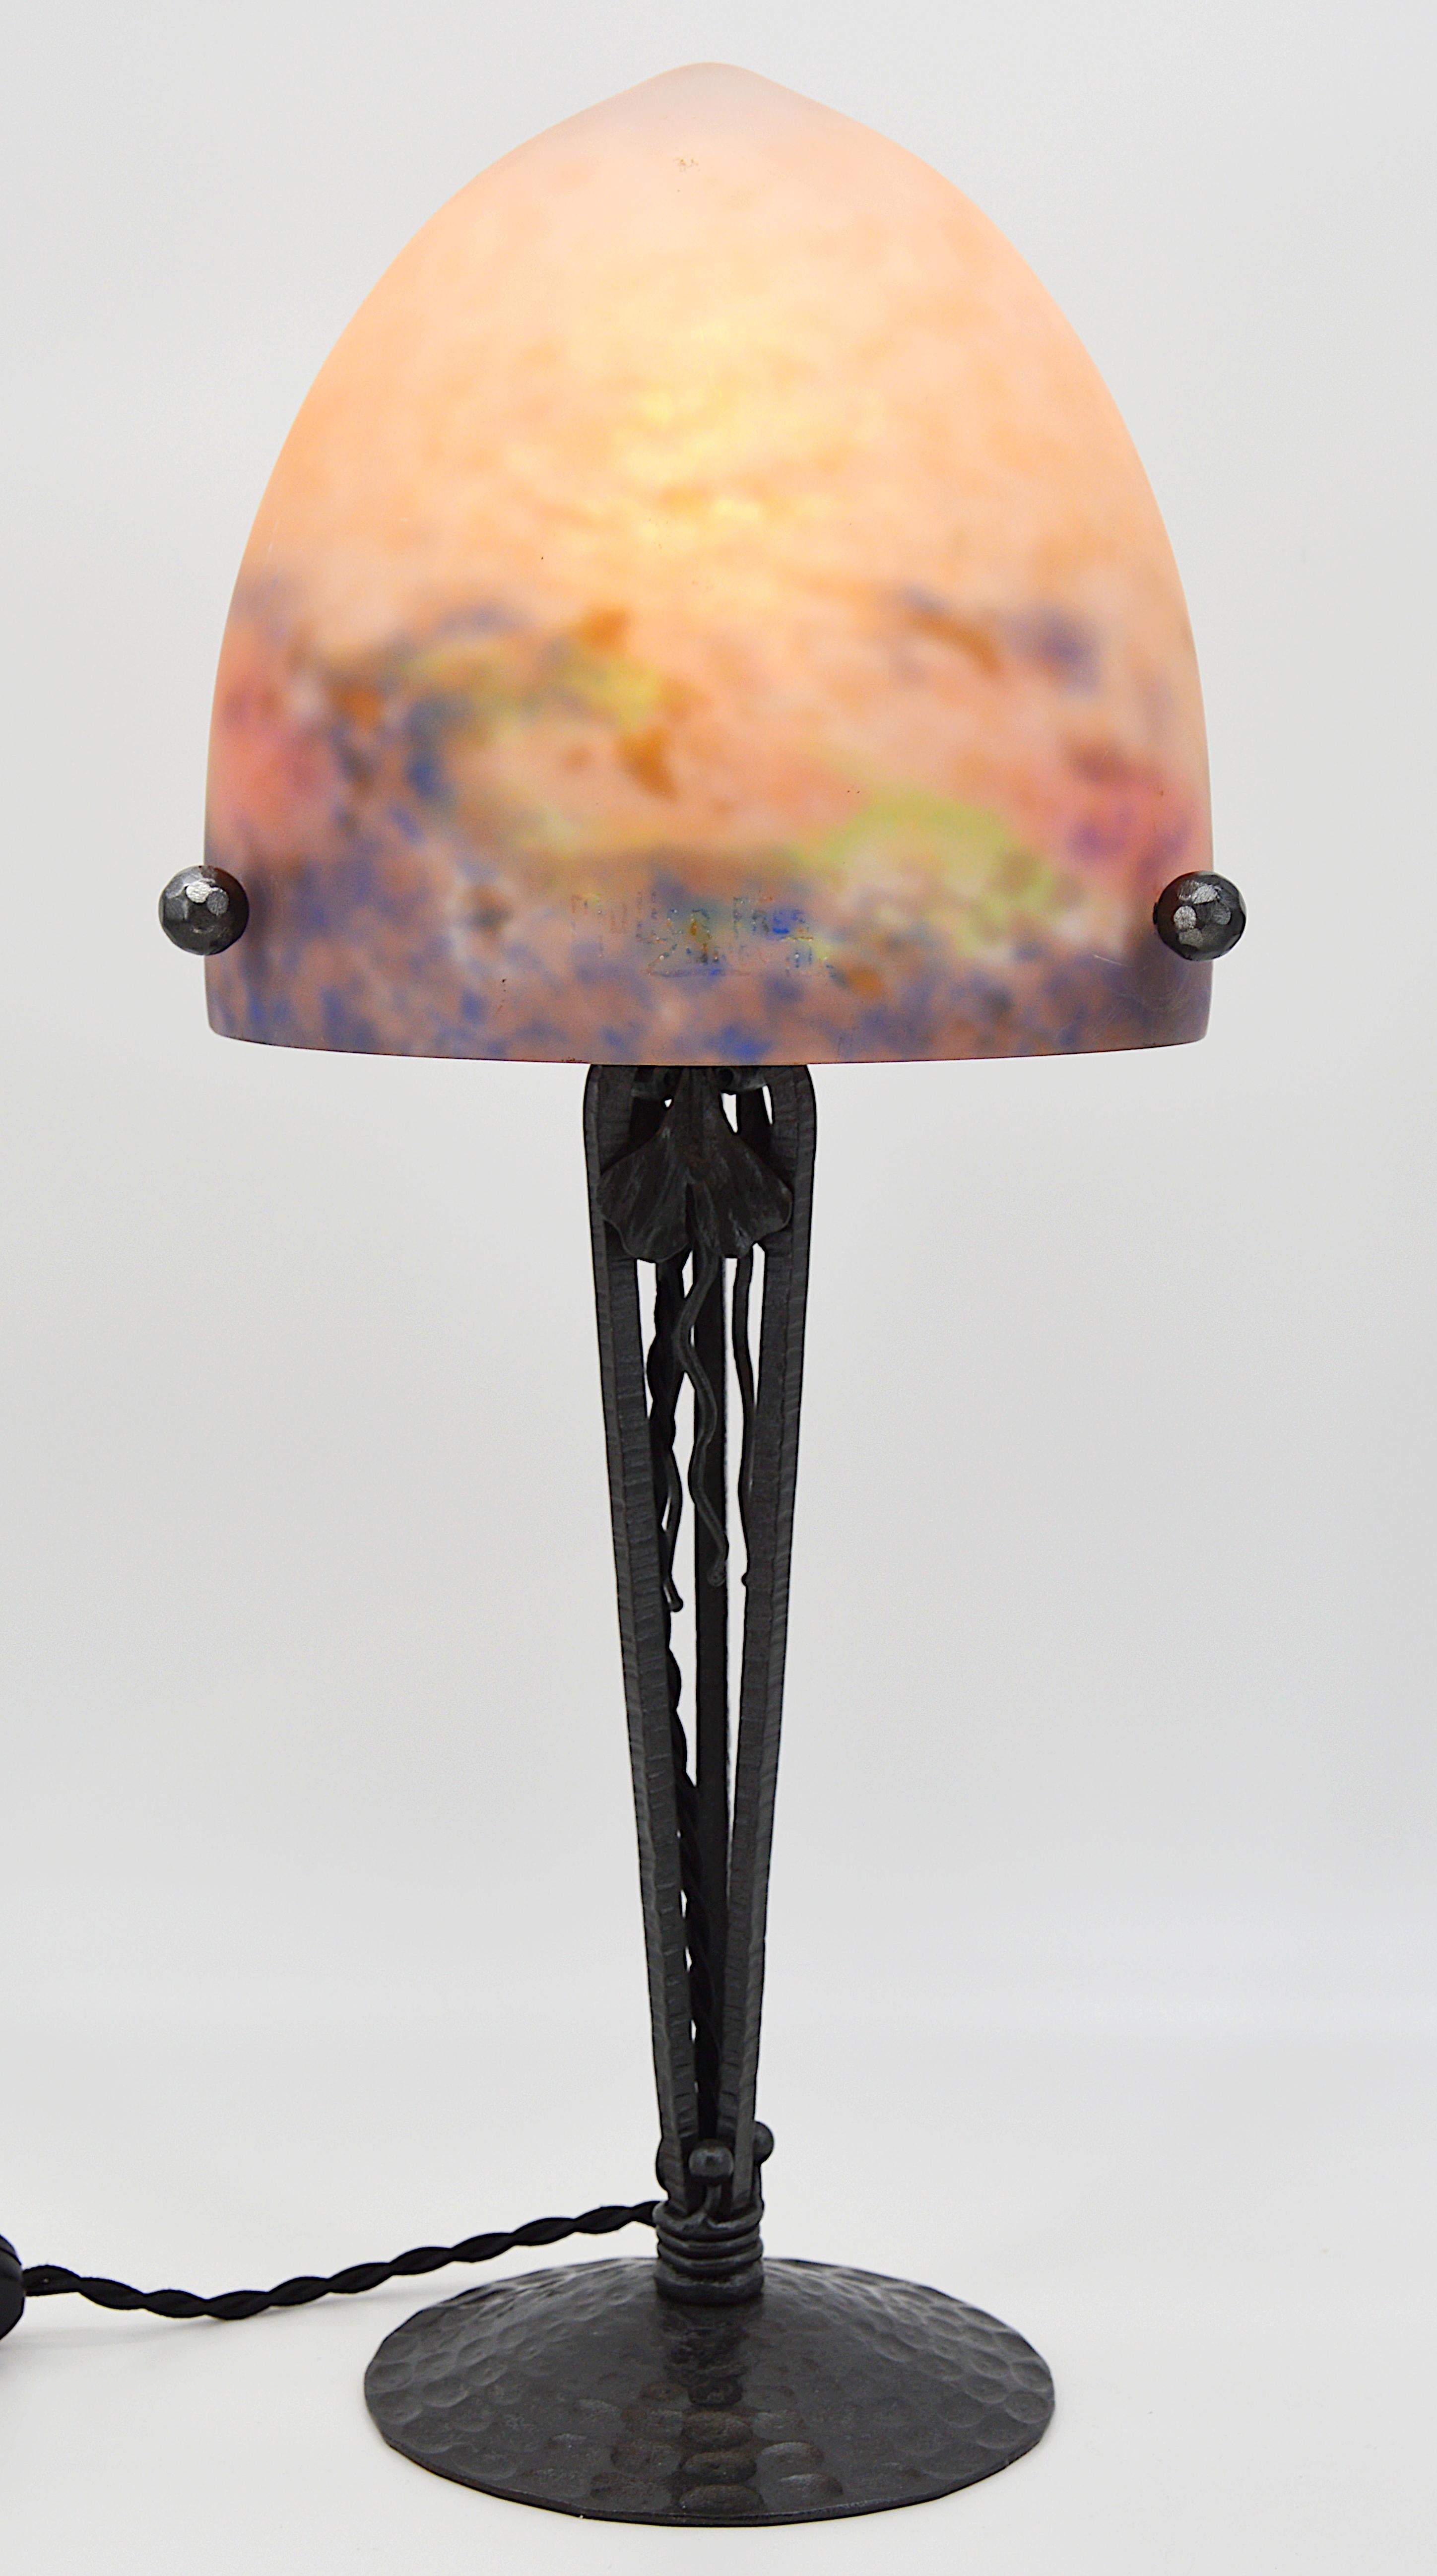 French Art Deco table lamp by Muller Frères, Luneville, France, circa 1921. Mottled glass shade, powders are applied between two layers, cut with the tool that comes on its classy wrought-iron base wit a ginkho pattern. Colors: blue, old rose, green